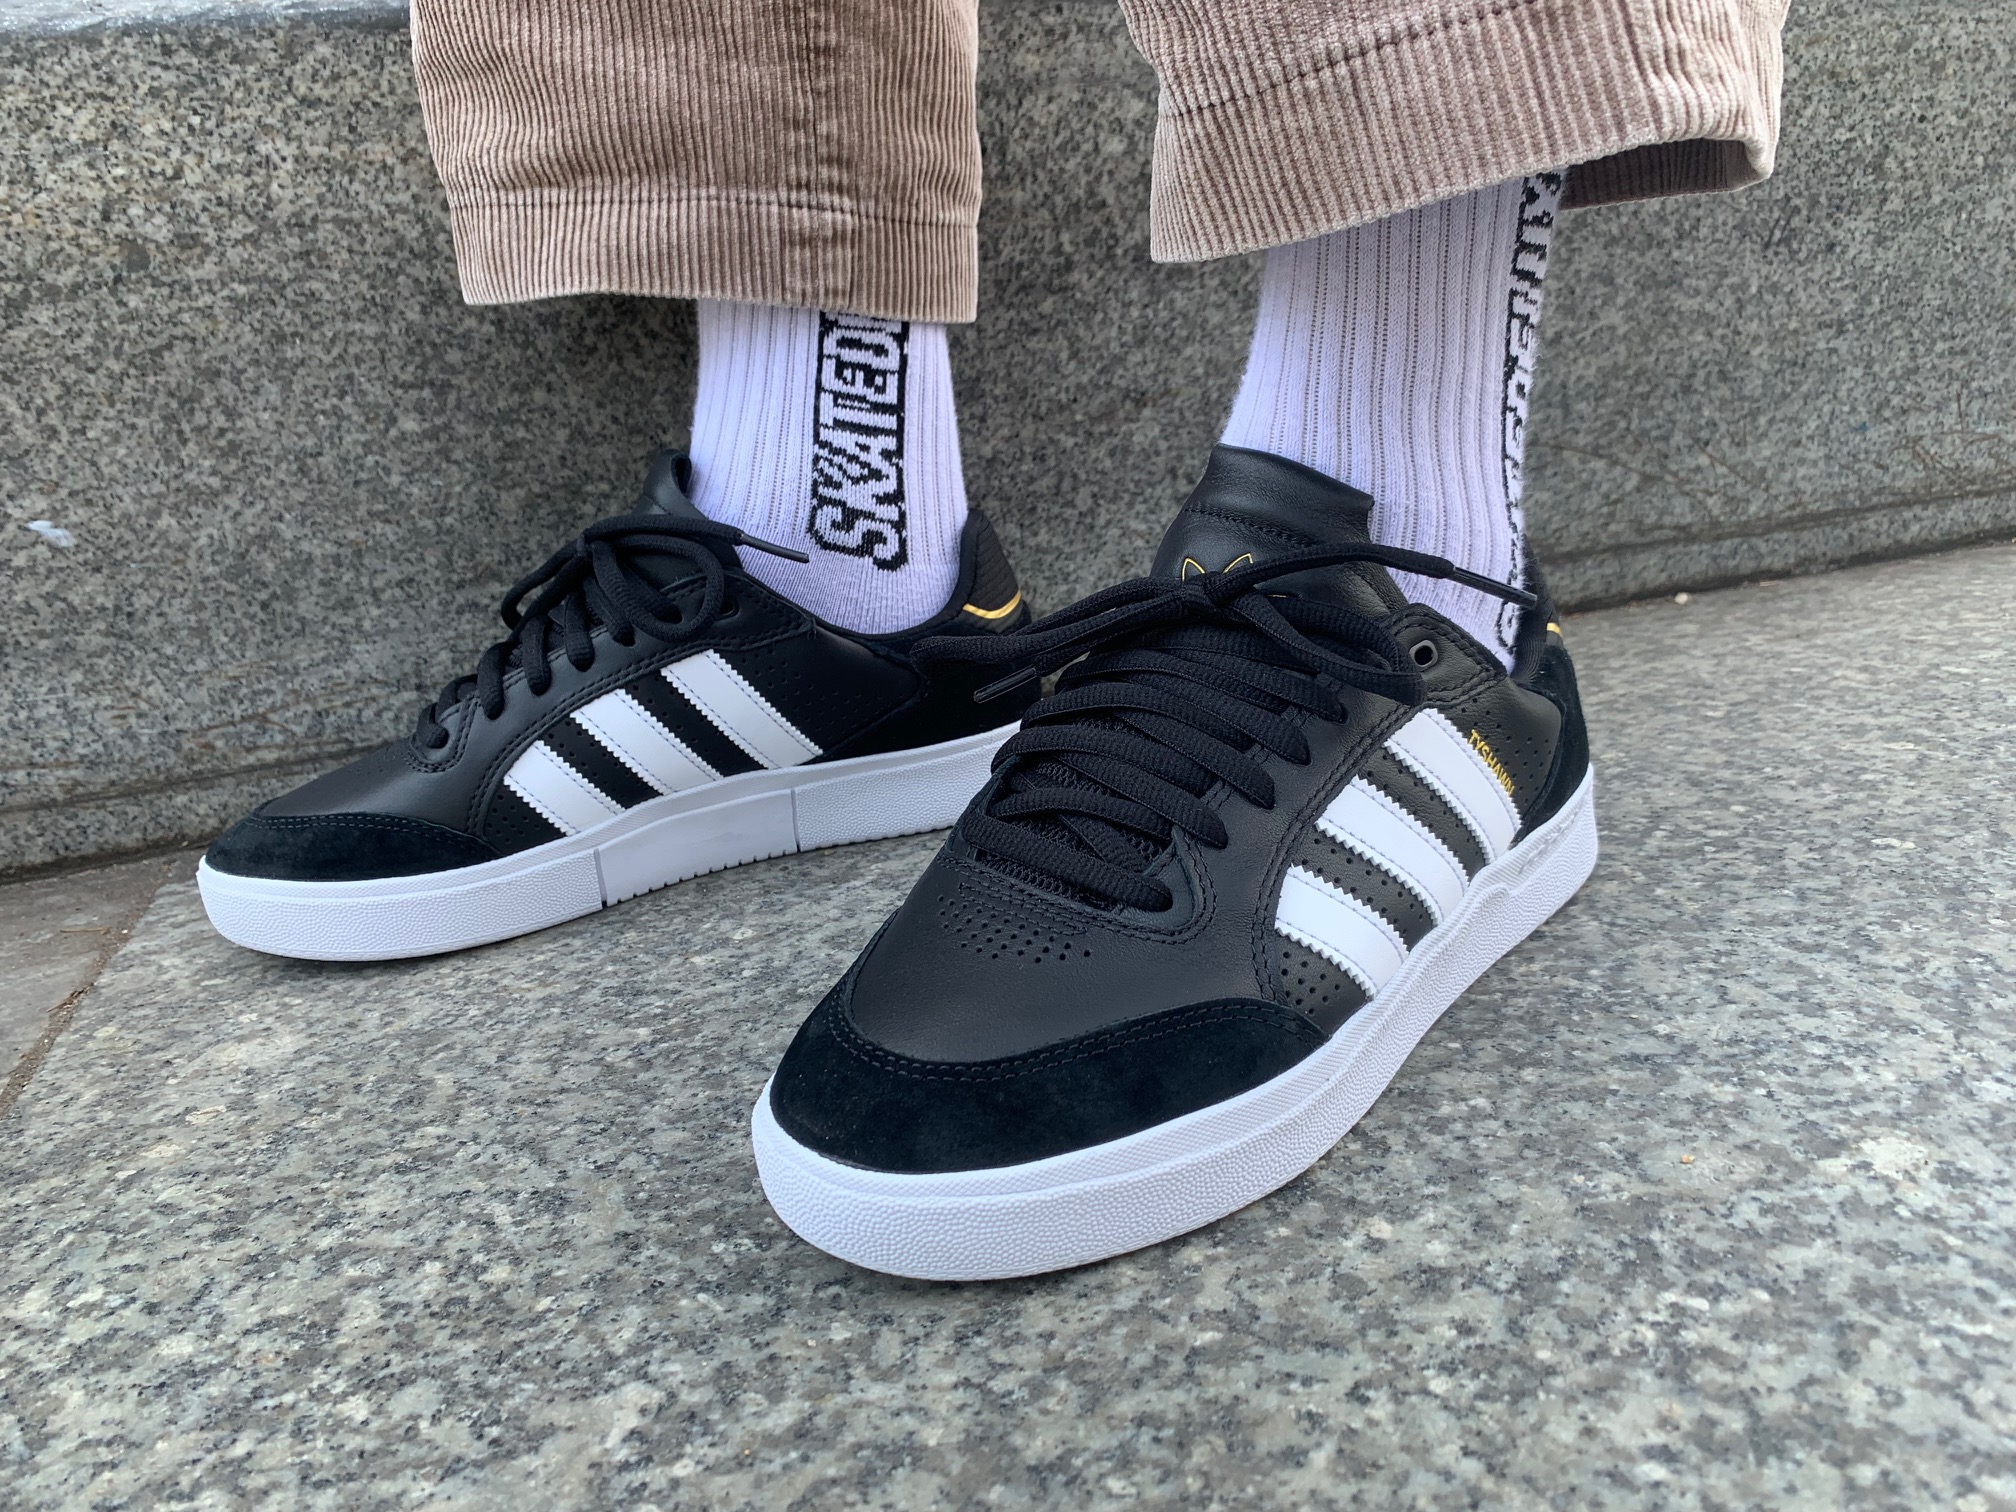 Are Adidas Shoes Good for Skateboarding?